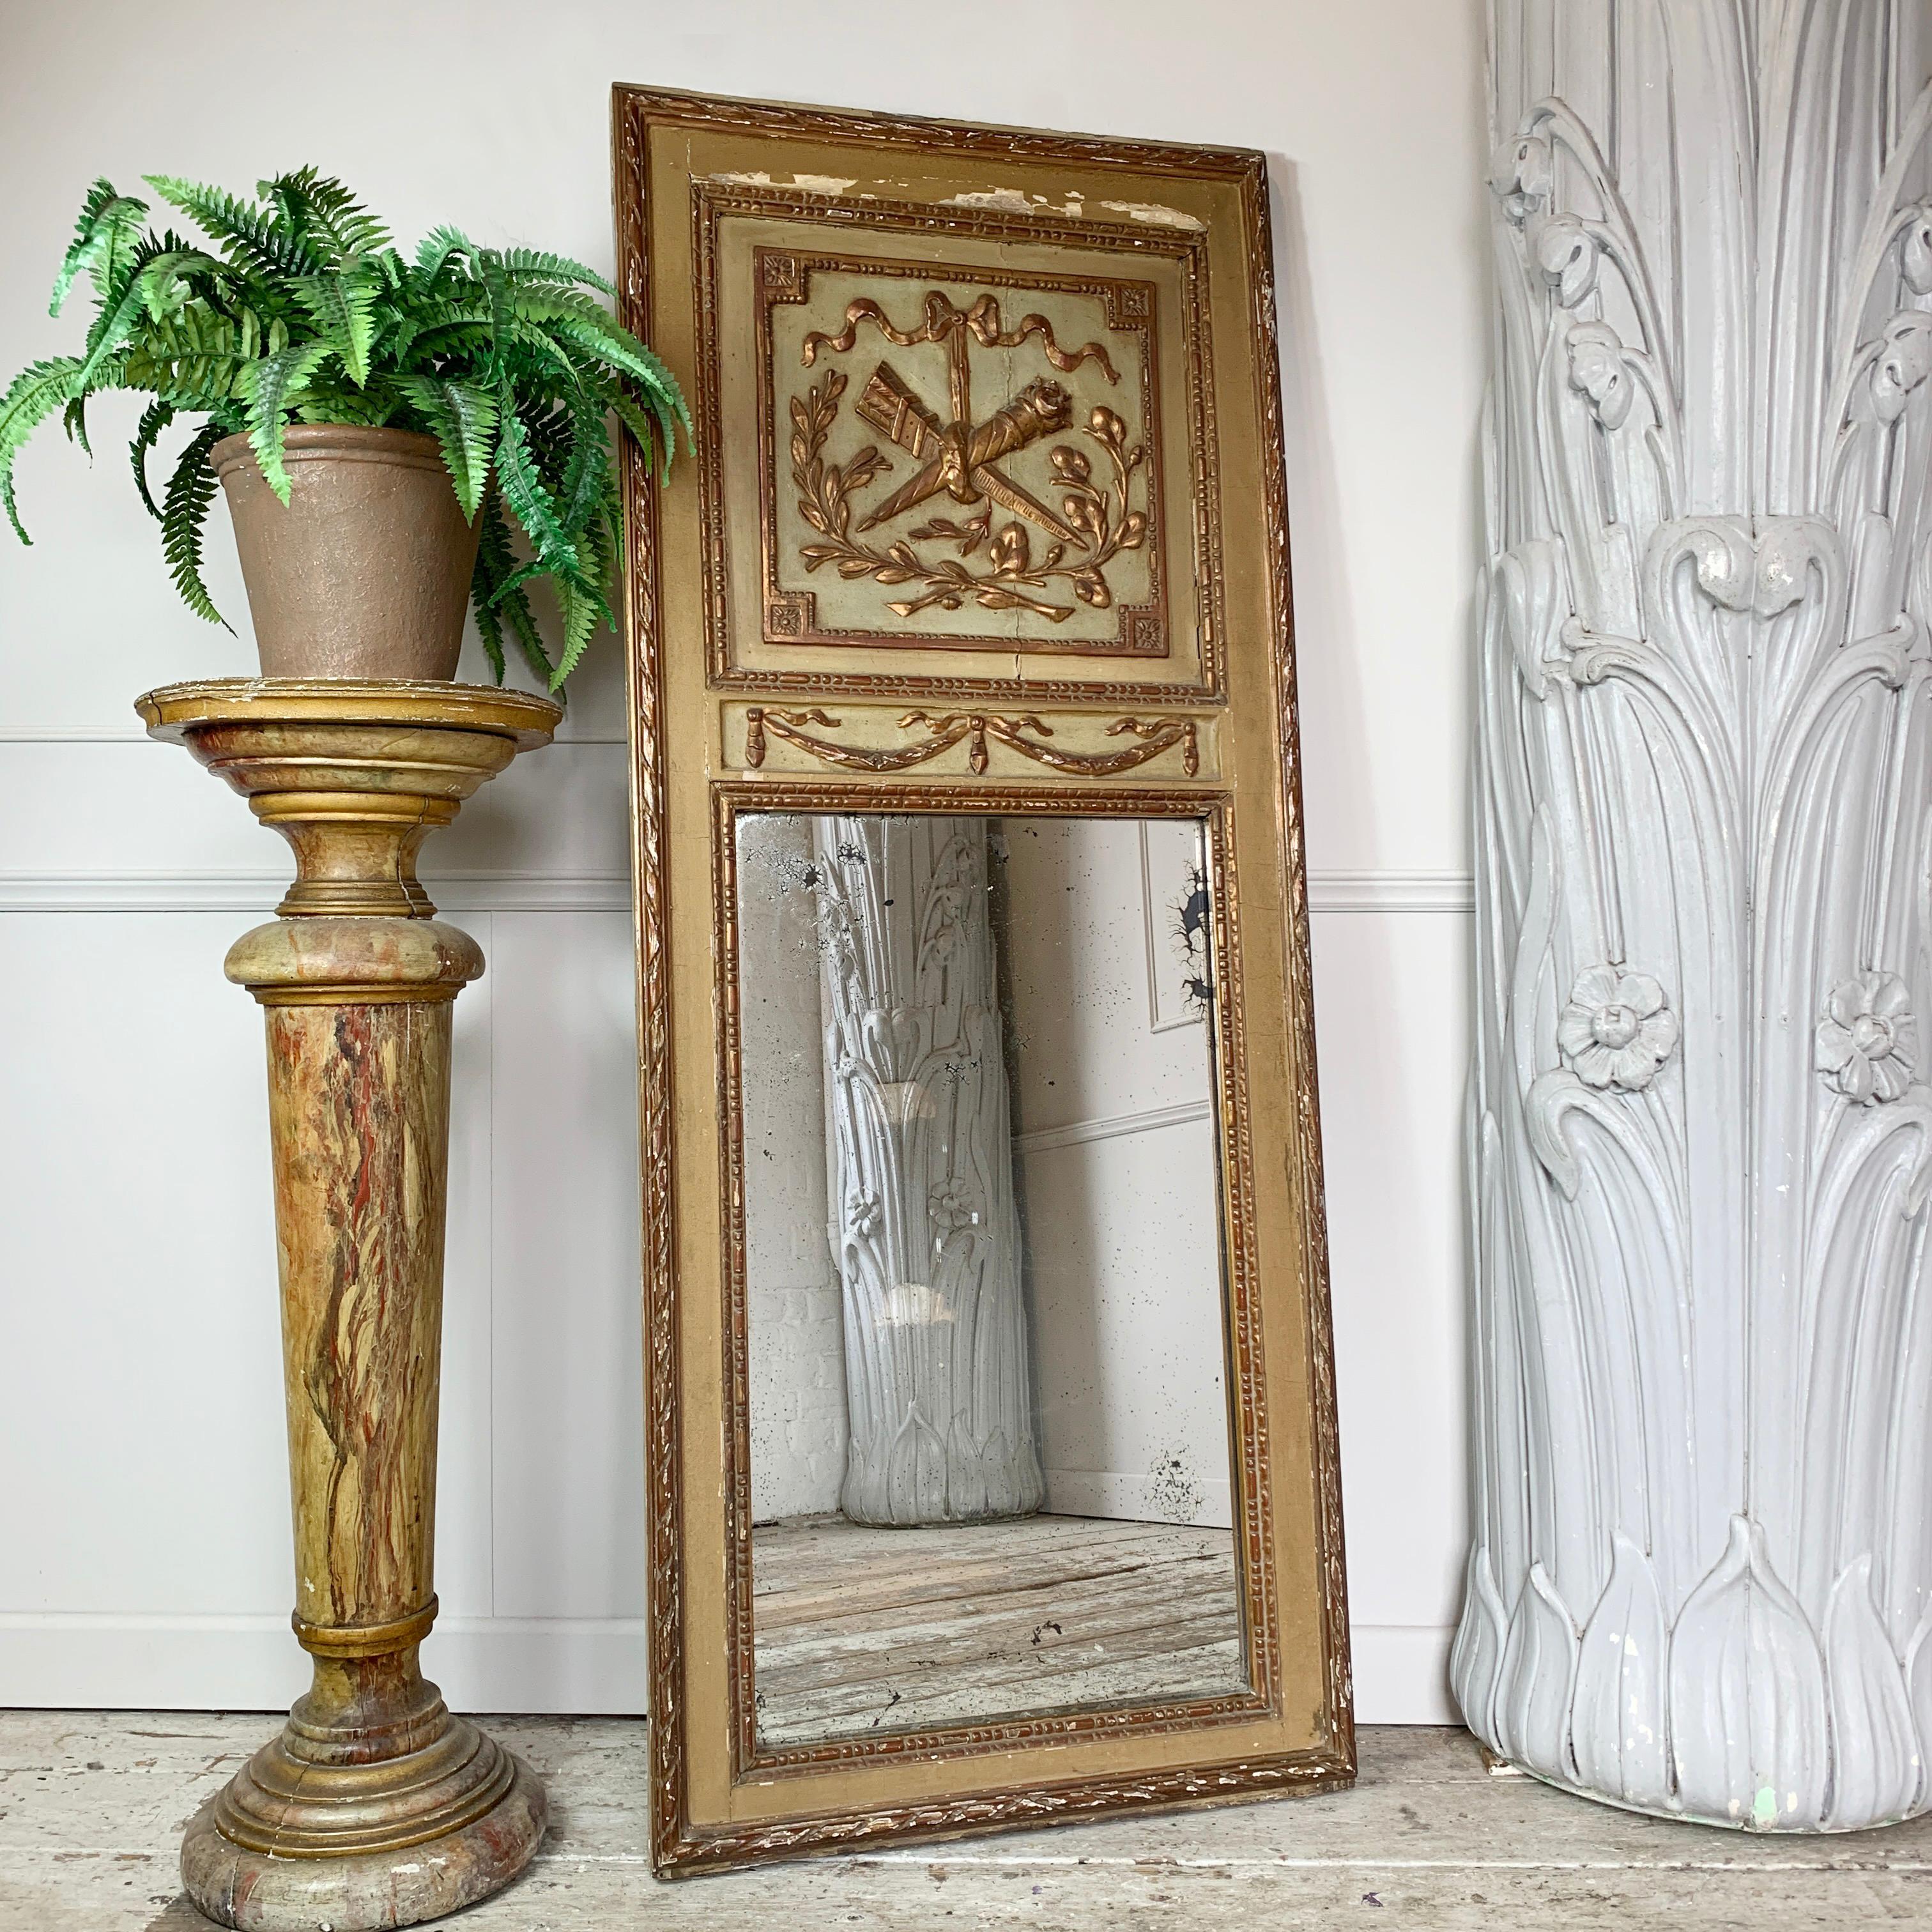 Early 19th c French gilt Trumeau mirror
Fantastic example of a French Trumeau mirror with elegant proportions. The carved wooden frame is overlaid with gesso and gilt, finished in gold and cream tones. 
The cartouche is detailed with the twin